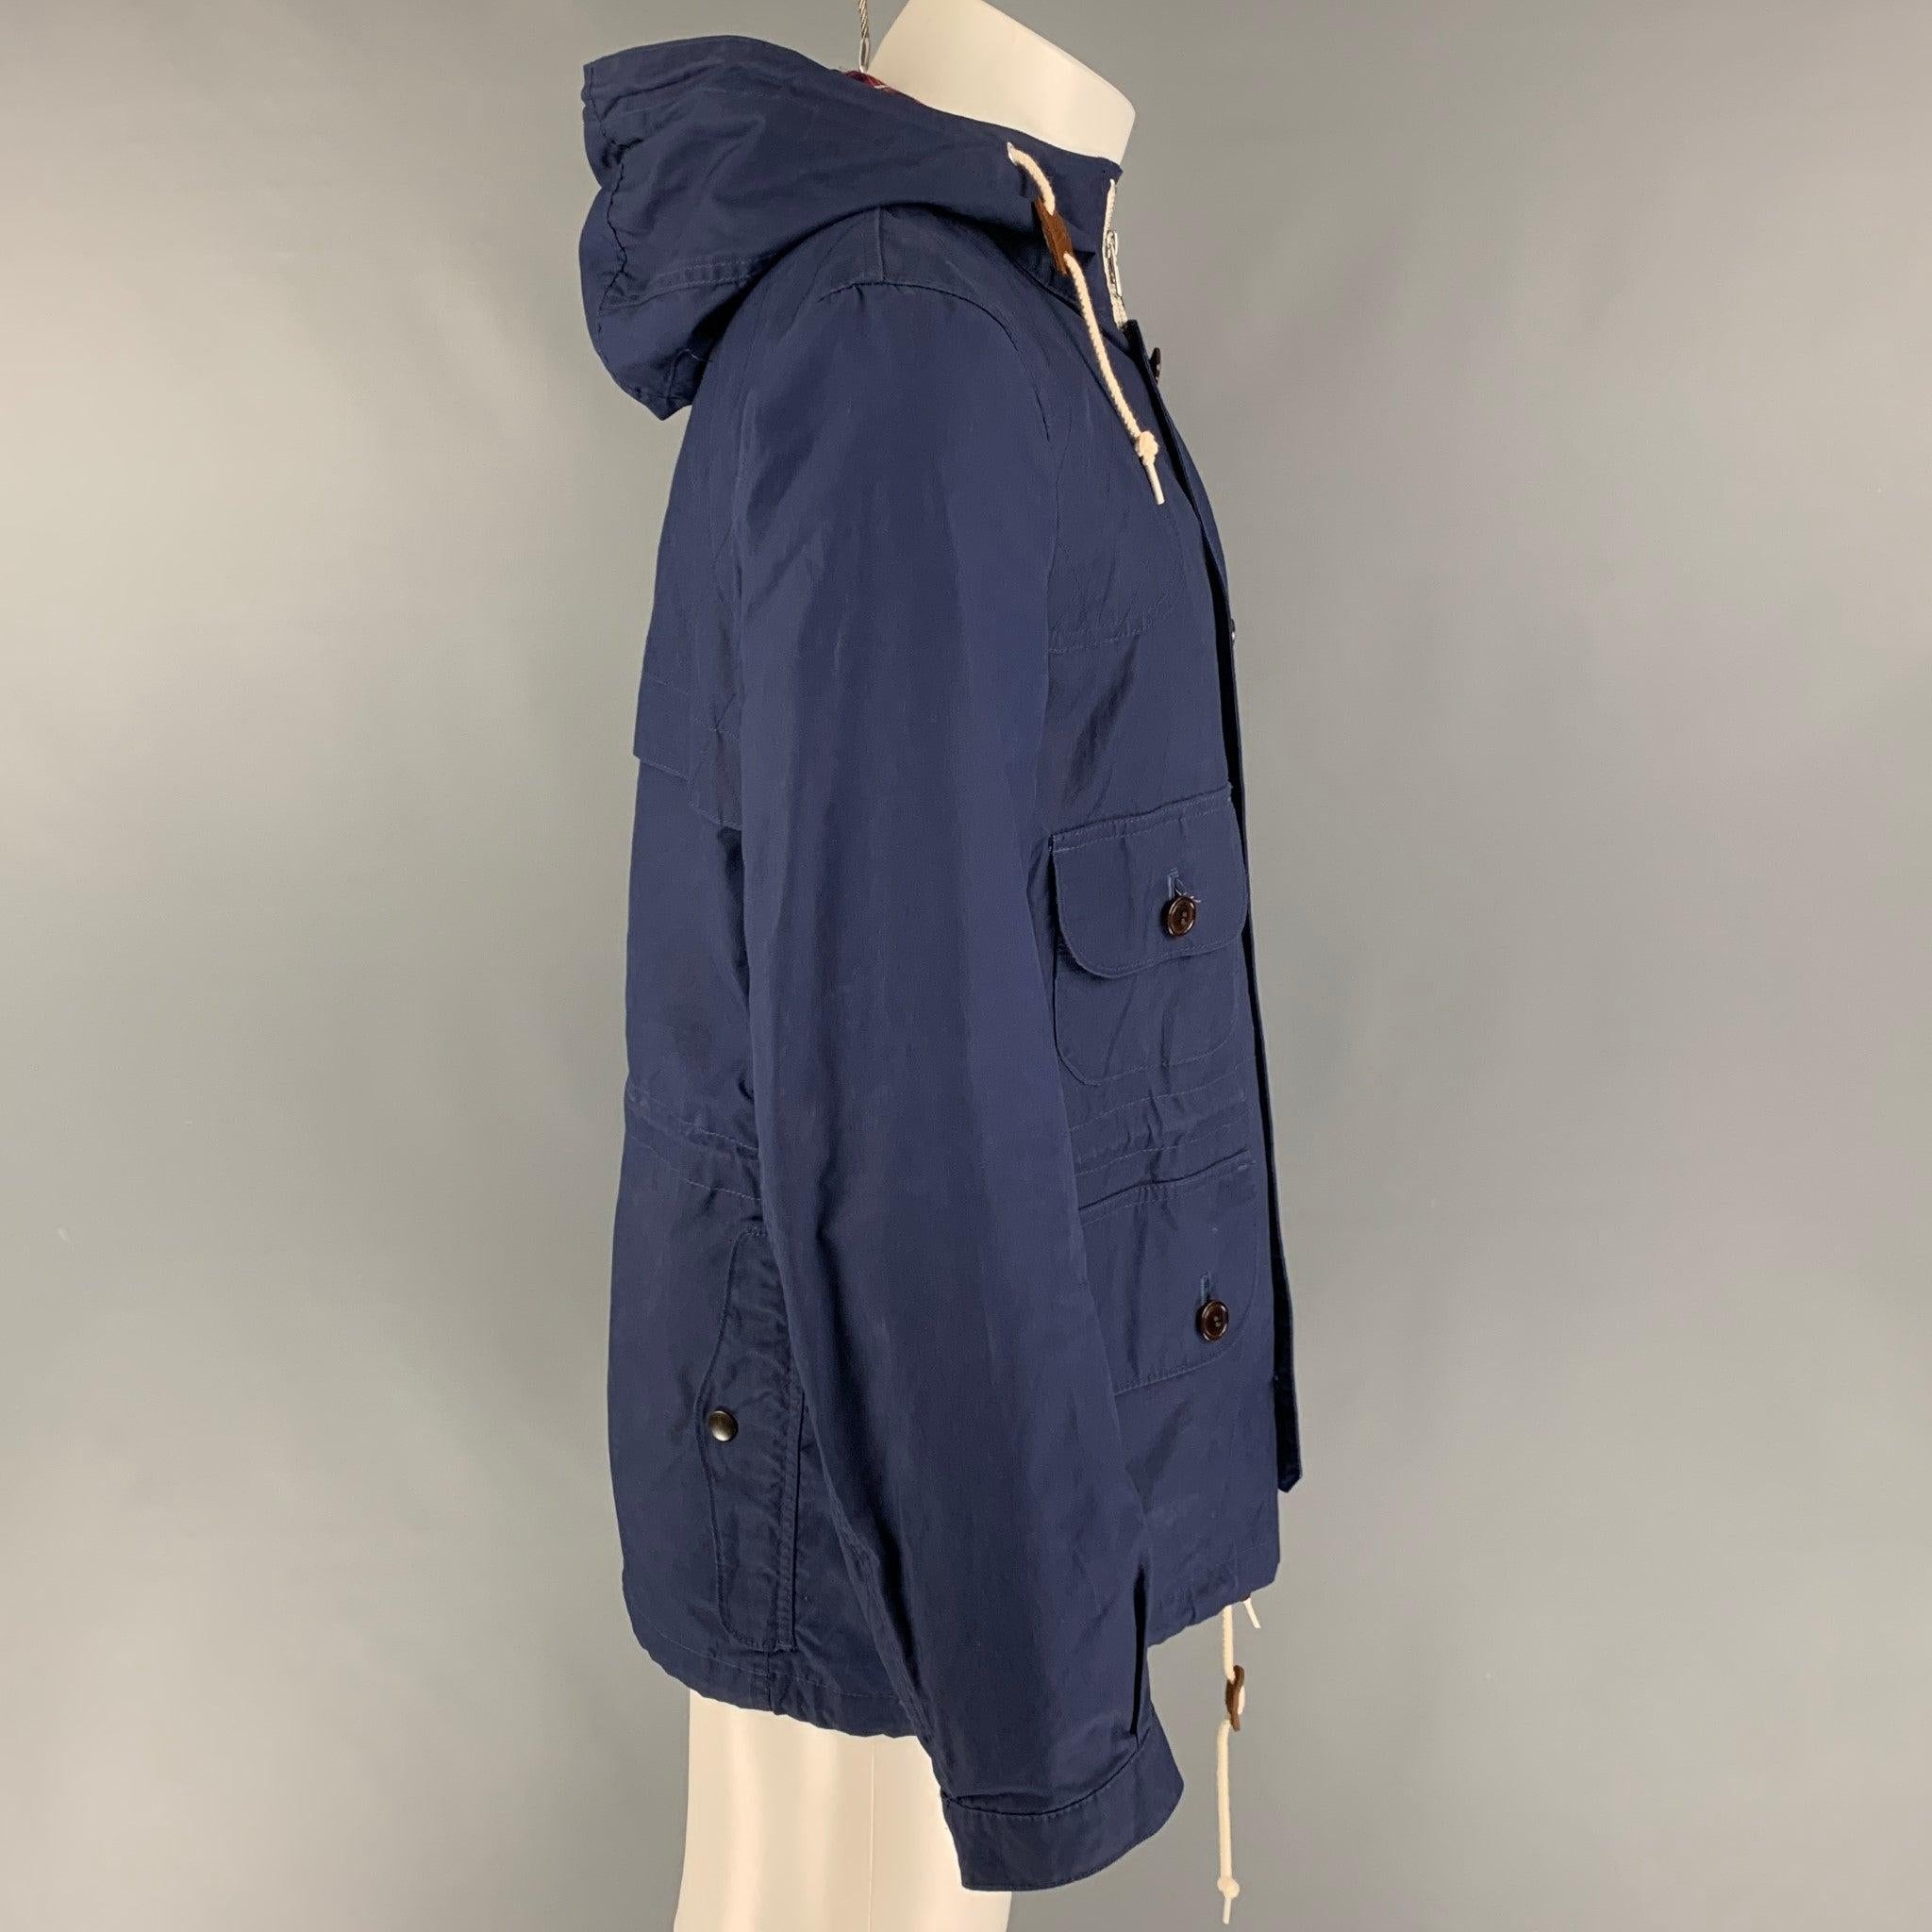 JUNYA WATANABE jacket comes in a navy coated canvas with a plaid trim featuring a nautical style, brown corduroy trim, patch pockets, drawstring, hooded, top stitching, and a zip & buttoned closure. Made in Japan.
Very Good
Pre-Owned Condition.